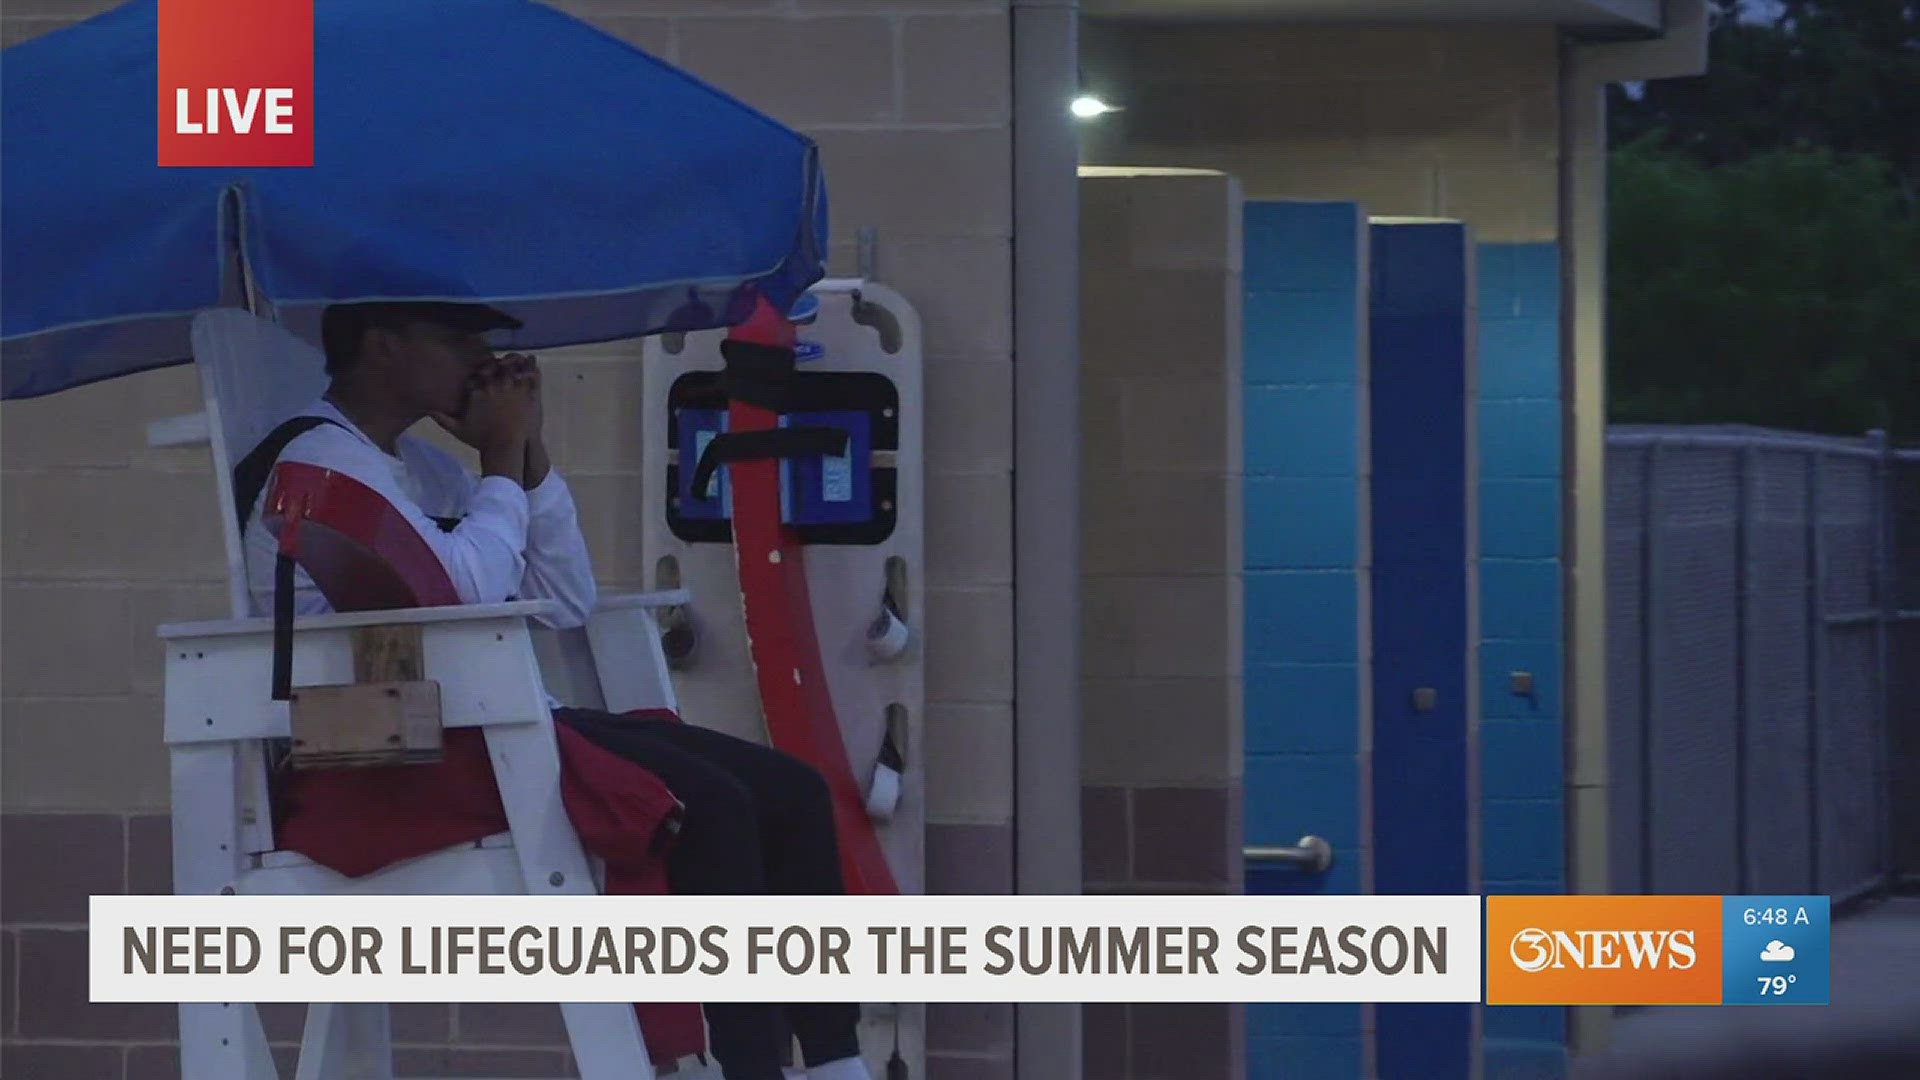 Parks & Rec Director Robert Dodd talked about the importance of lifeguards in our community and even announced that all lifeguards have received a raise this summer!